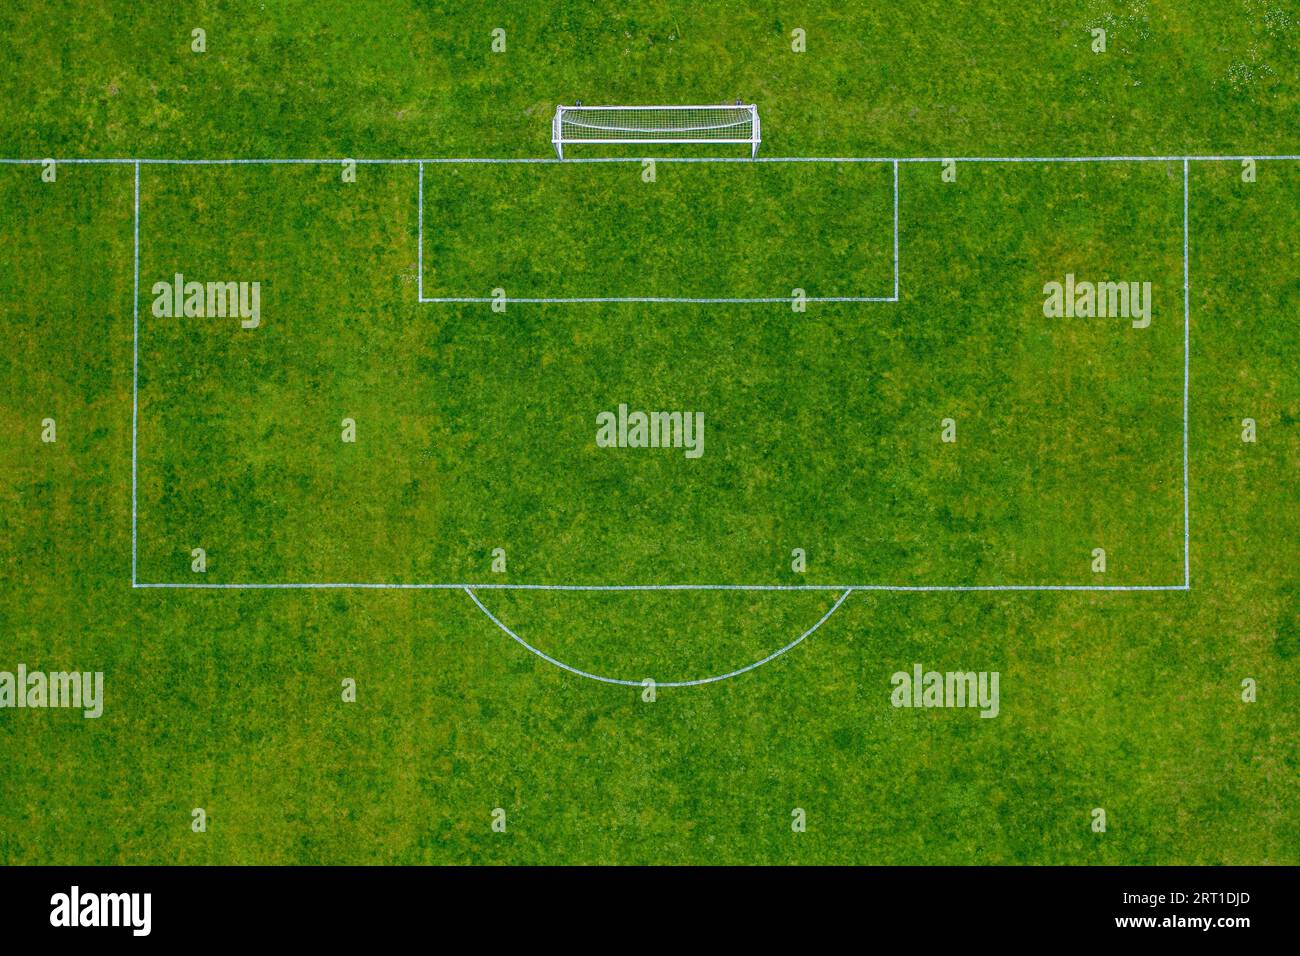 Aeriel drone view of the penalty area on a soccer field Stock Photo